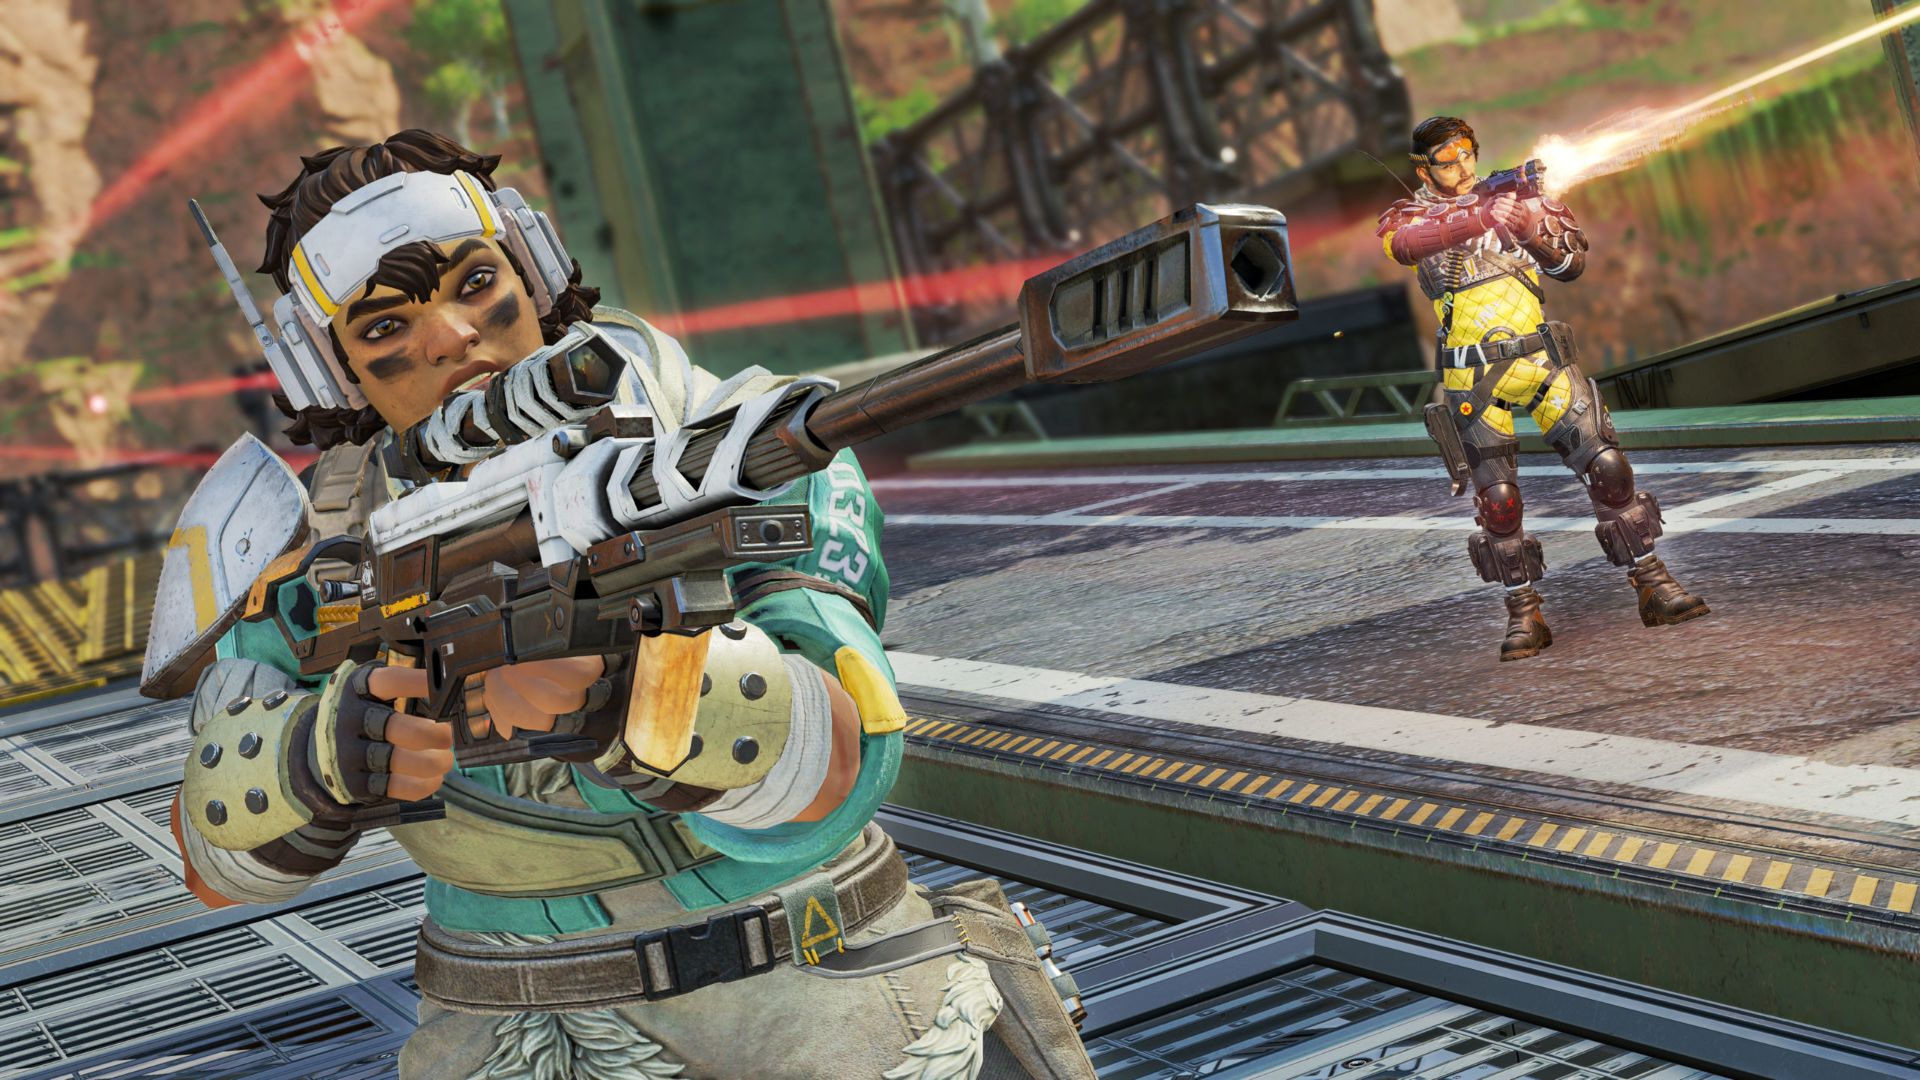 Best Xbox FPS games: Lifeline looks down the barrel of a sniper rifle in Apex Legends